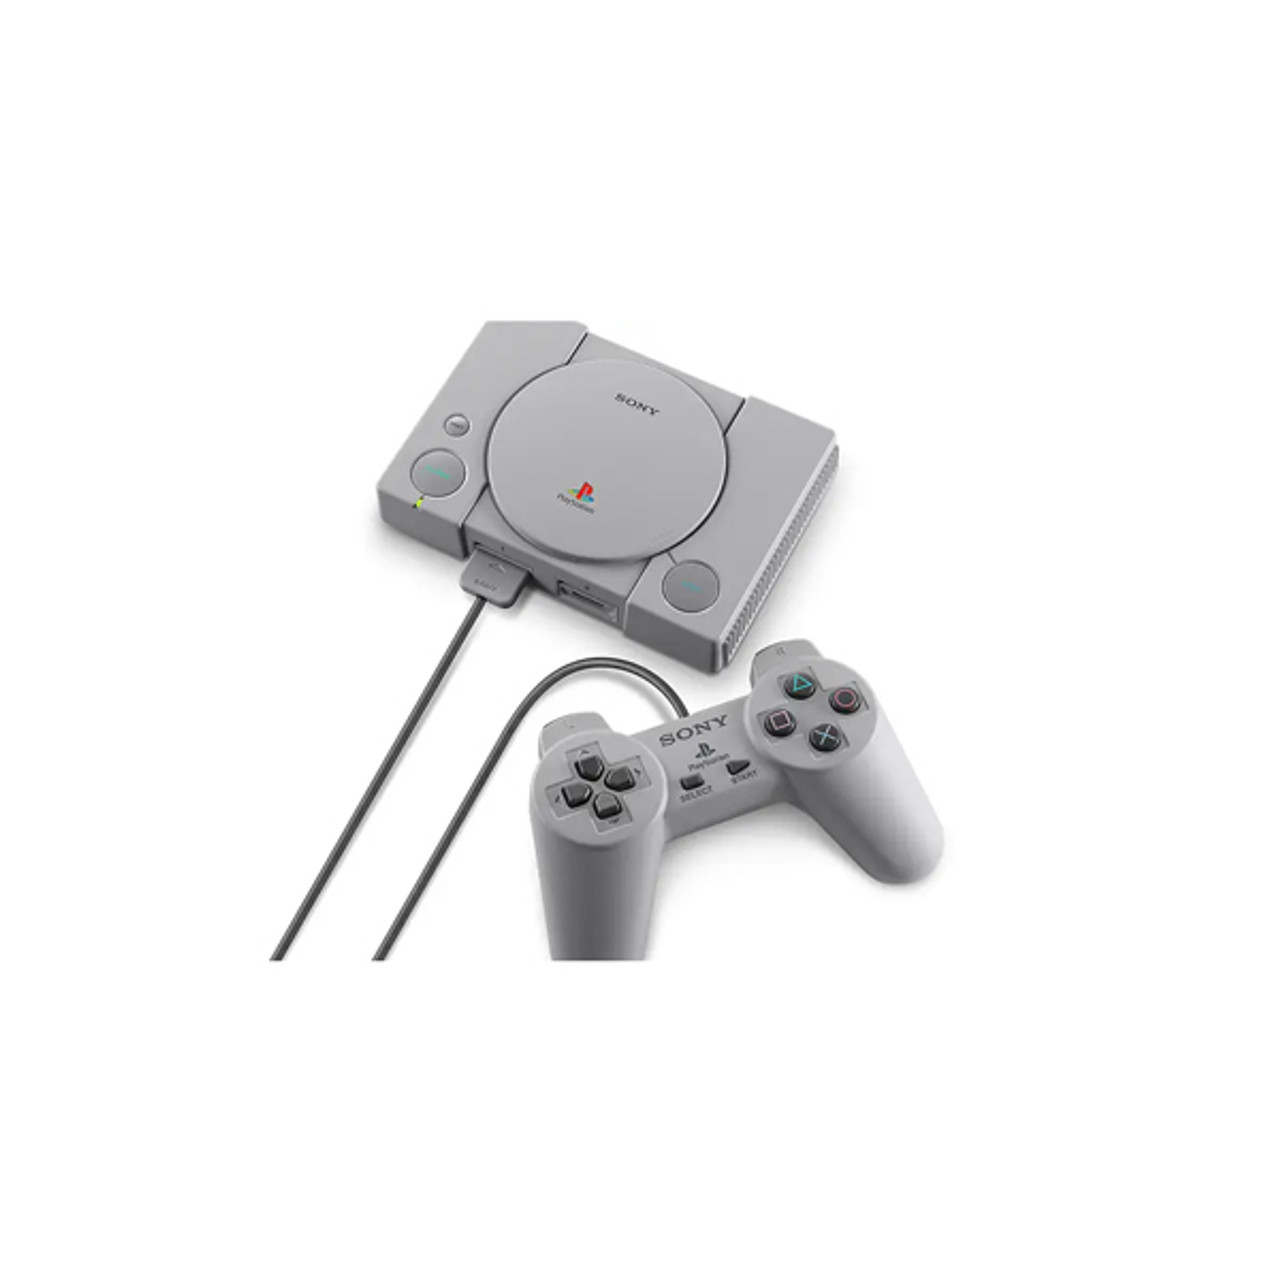 Where to Buy the PlayStation Classic Mini Console